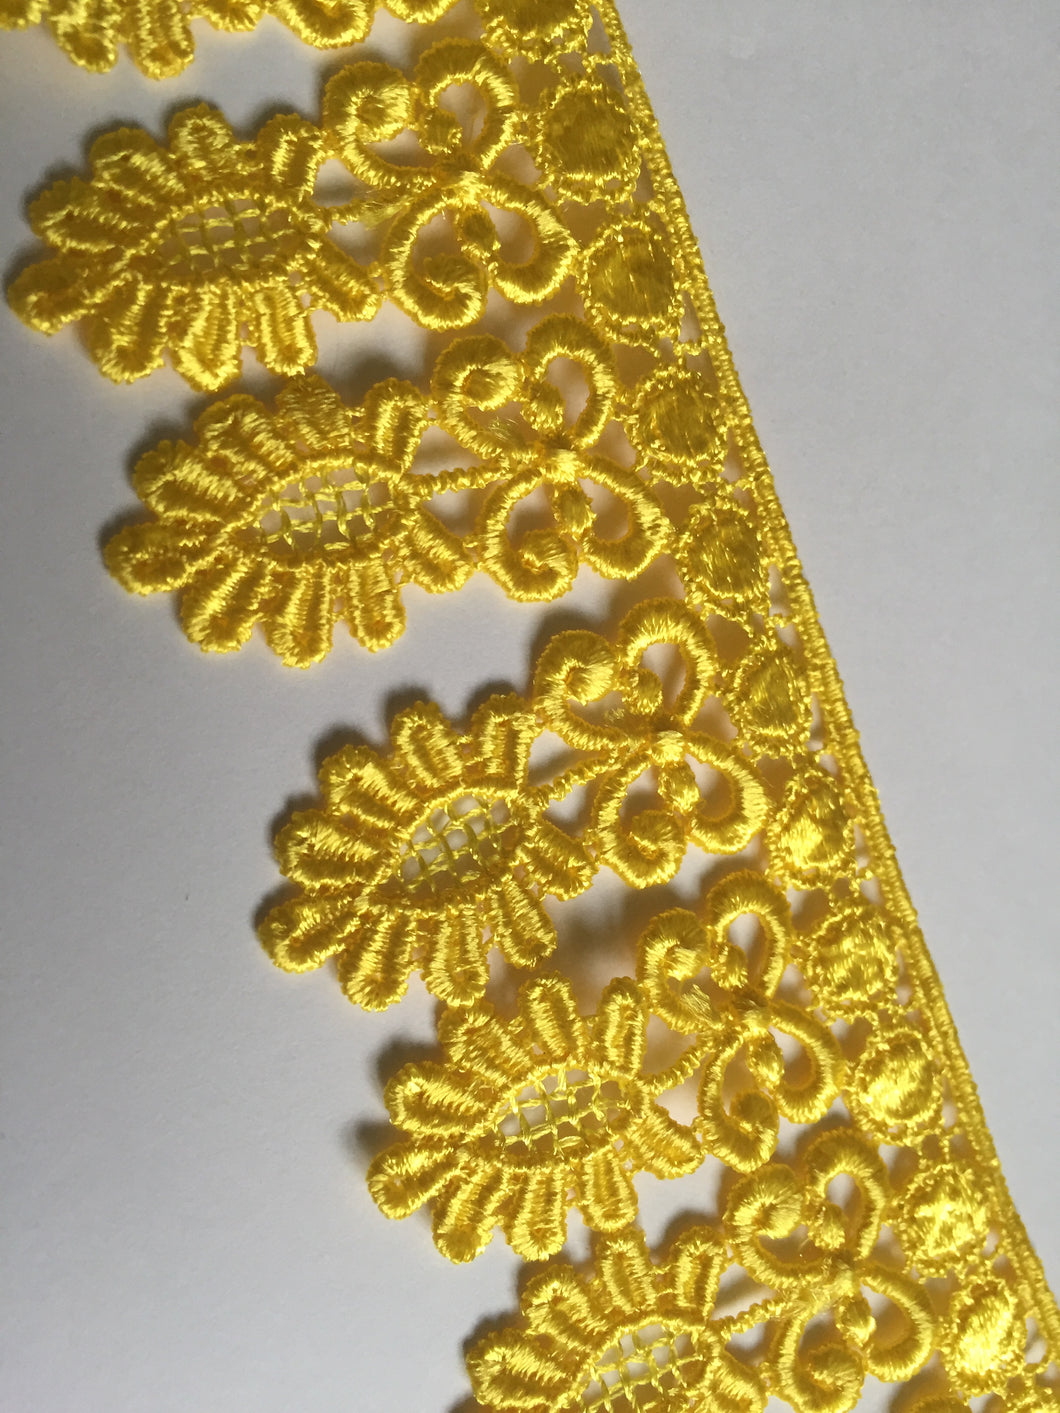 1m YELLOW Lace Trims 60mm Wide Embroidered Guipure Trimmings Cardmaking Wedding Home Decor Sewing Craft Projects